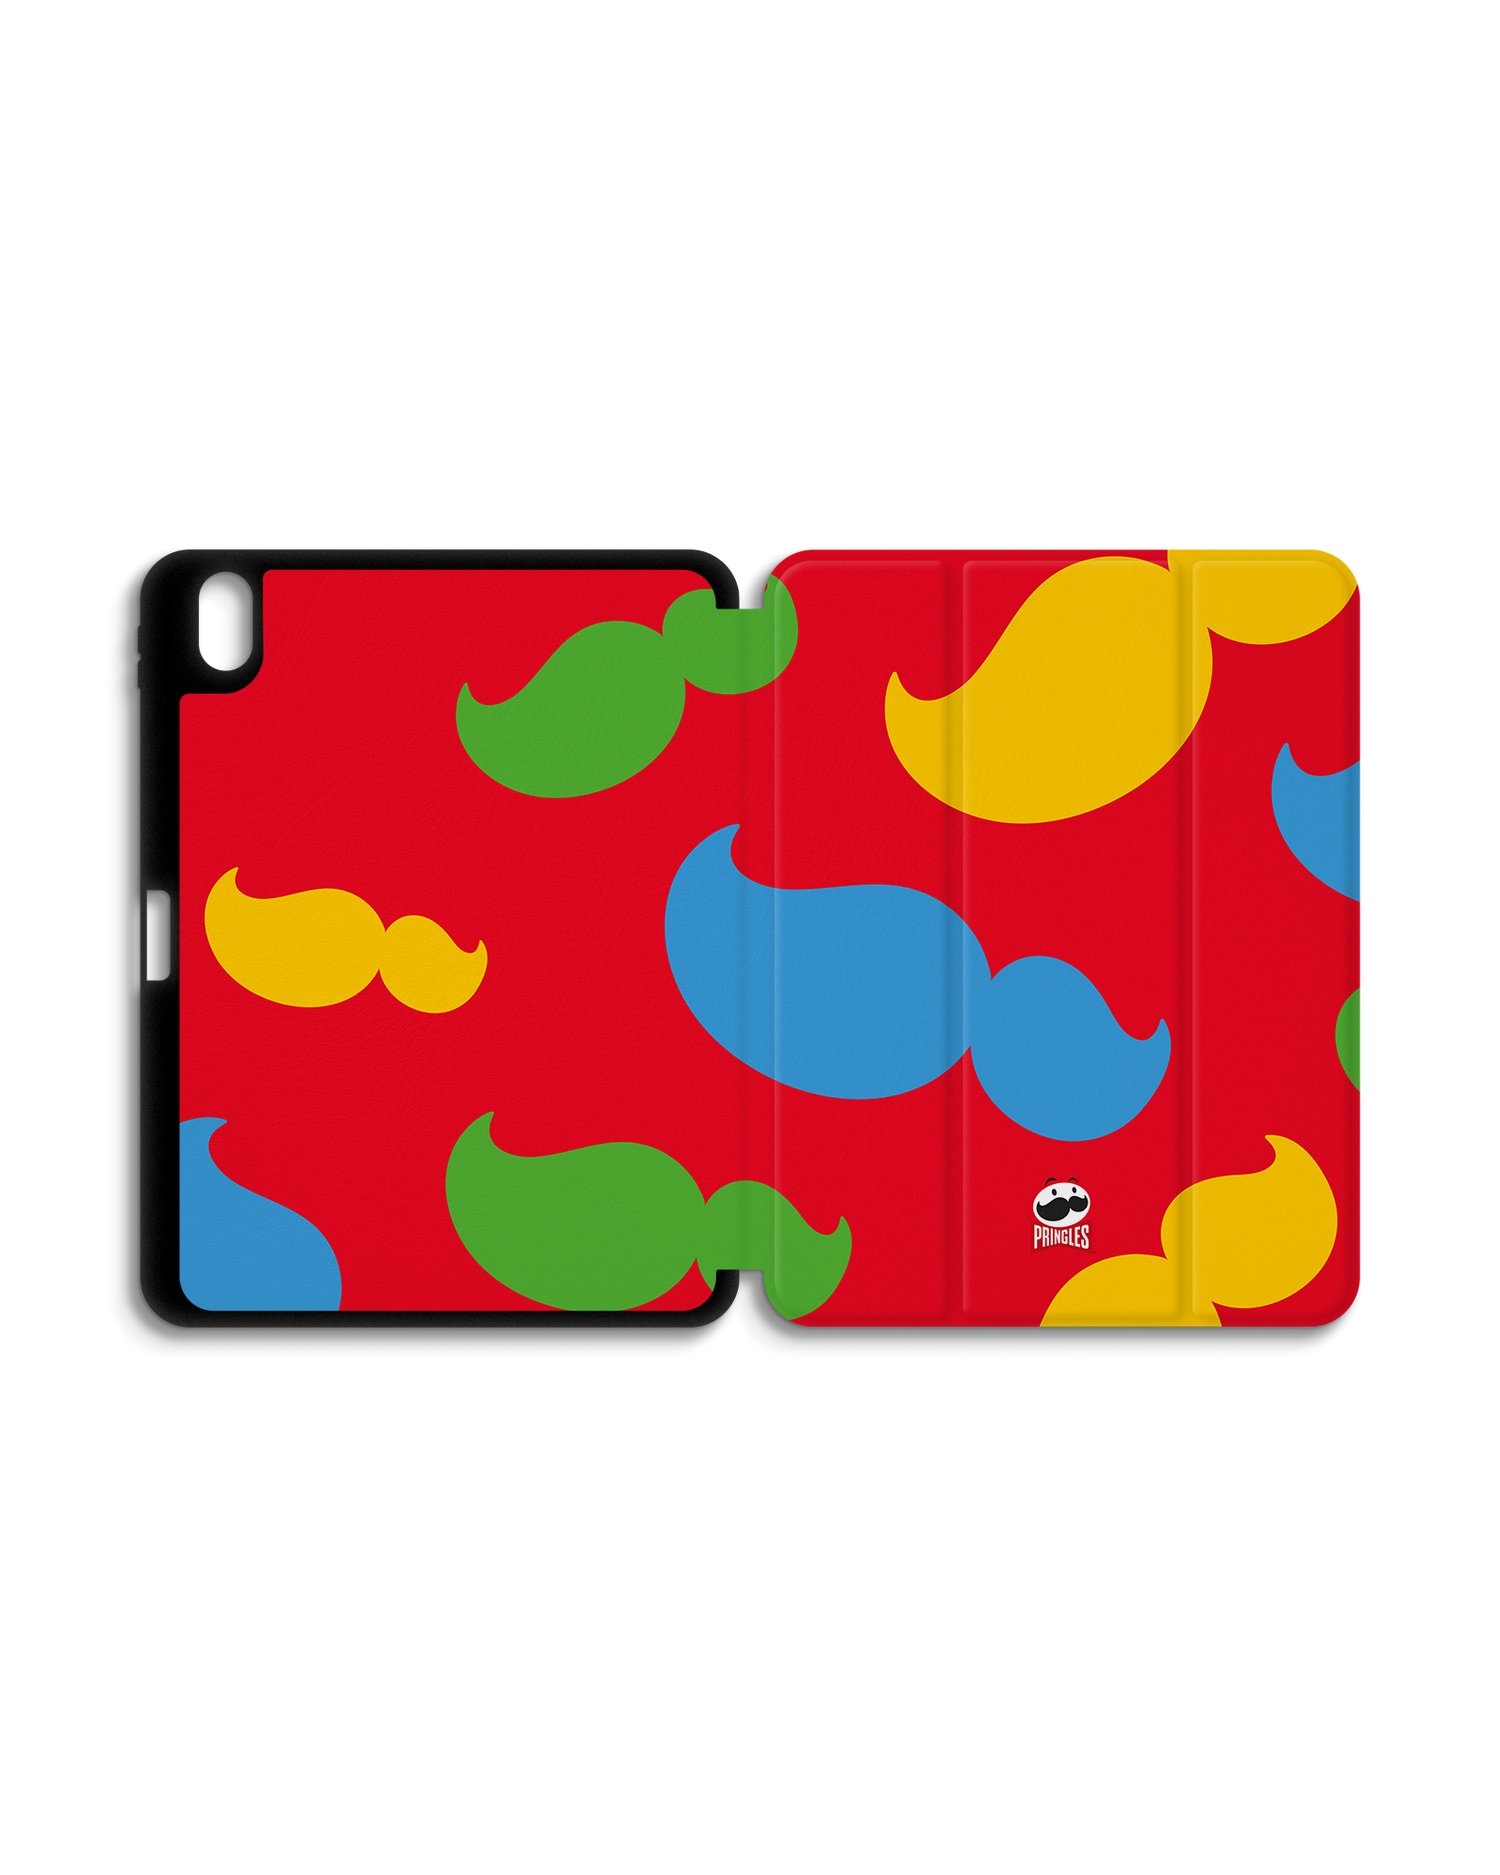 Pringles Moustache iPad Case with Pencil Holder for Apple iPad (10th Generation): Opened exterior view